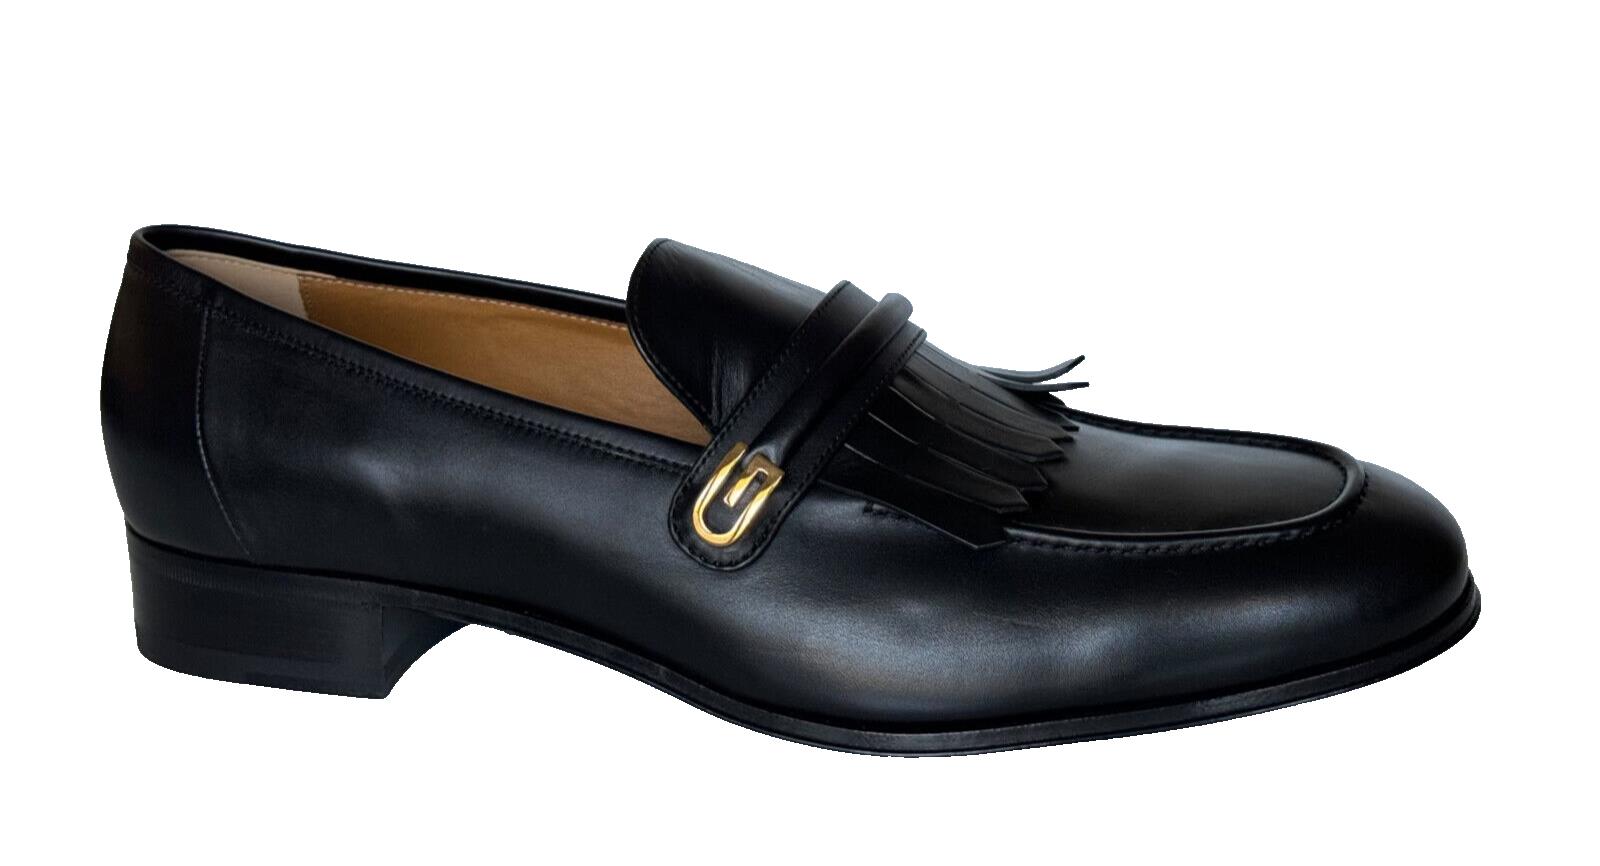 NIB Gucci Men’s Moccasin Leather Dress Shoes Black 14 US (13 Gucci) 714680 Italy